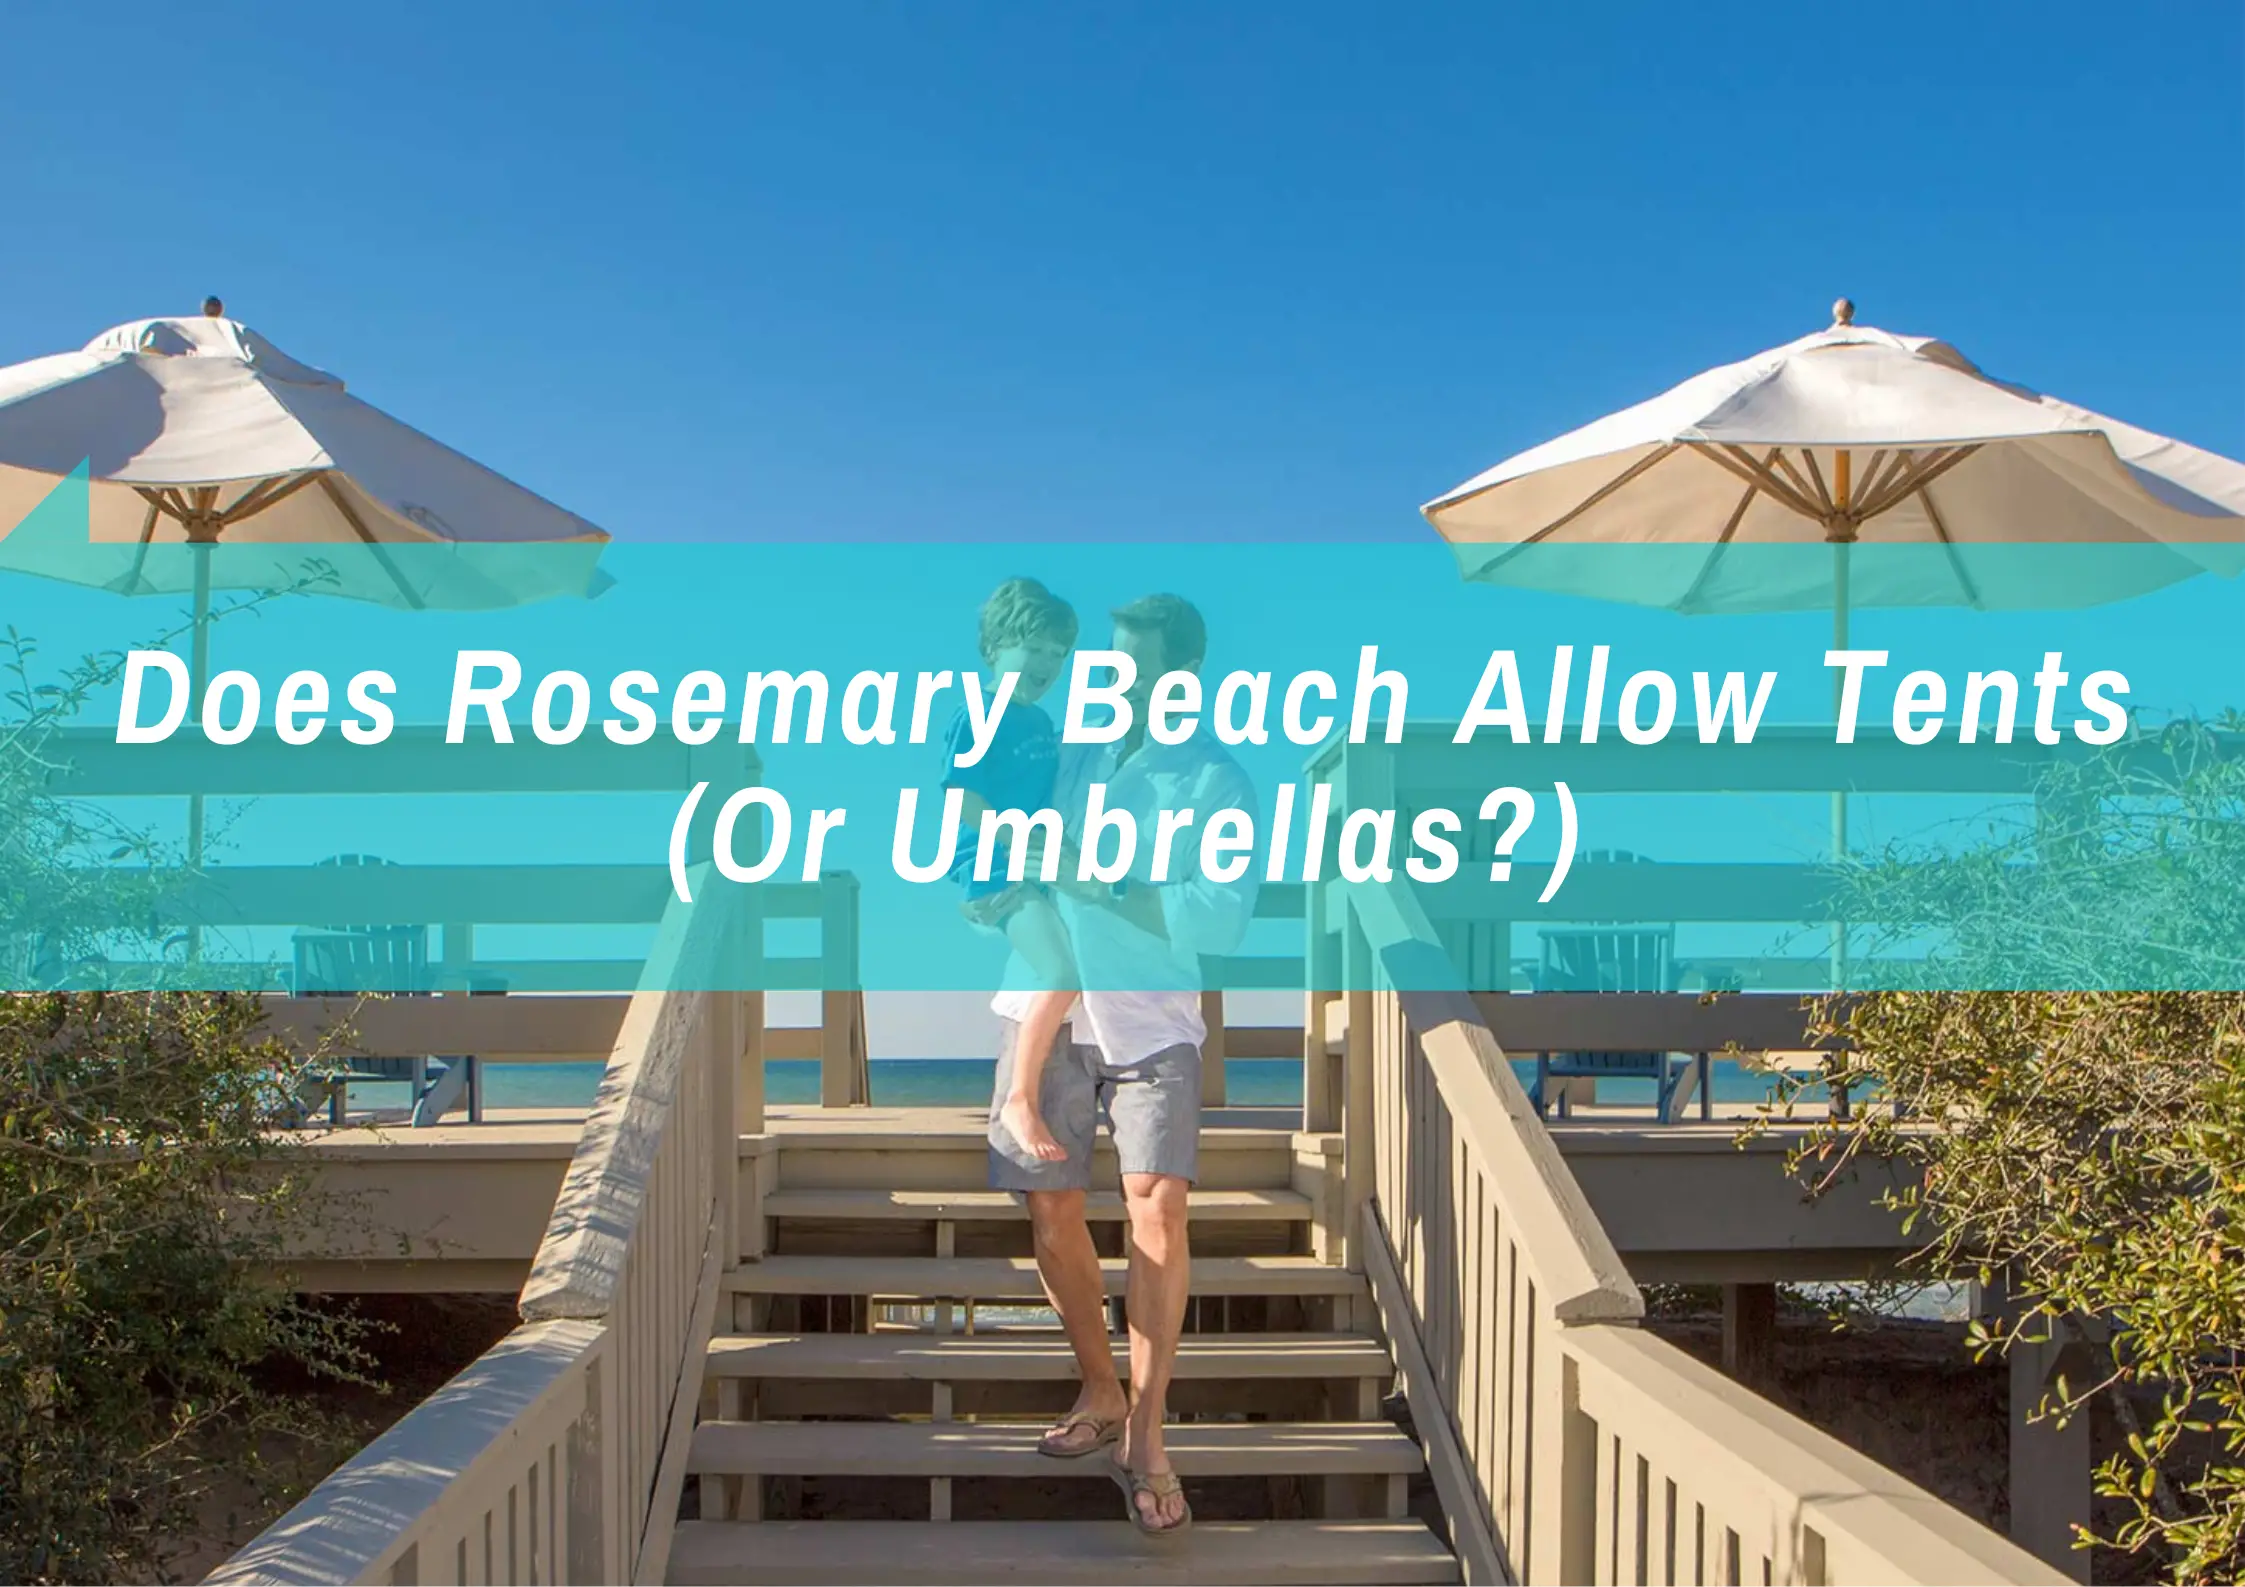 You are currently viewing Can You Bring Tents and Umbrellas to Rosemary Beach?